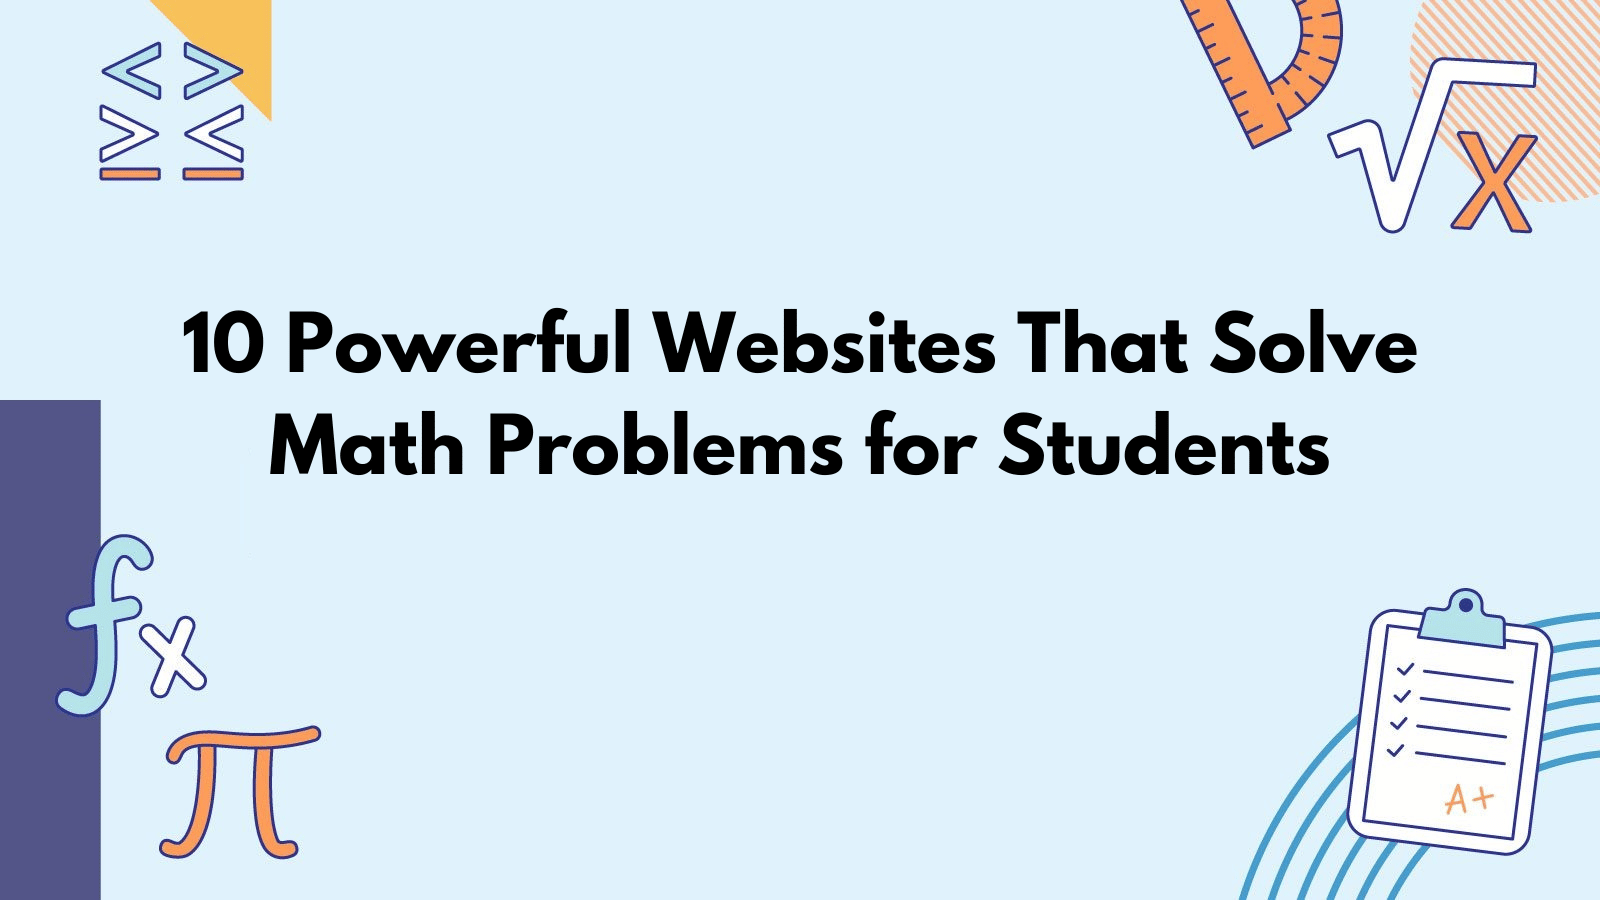 10 Powerful Websites That Solve Math Problems for Students